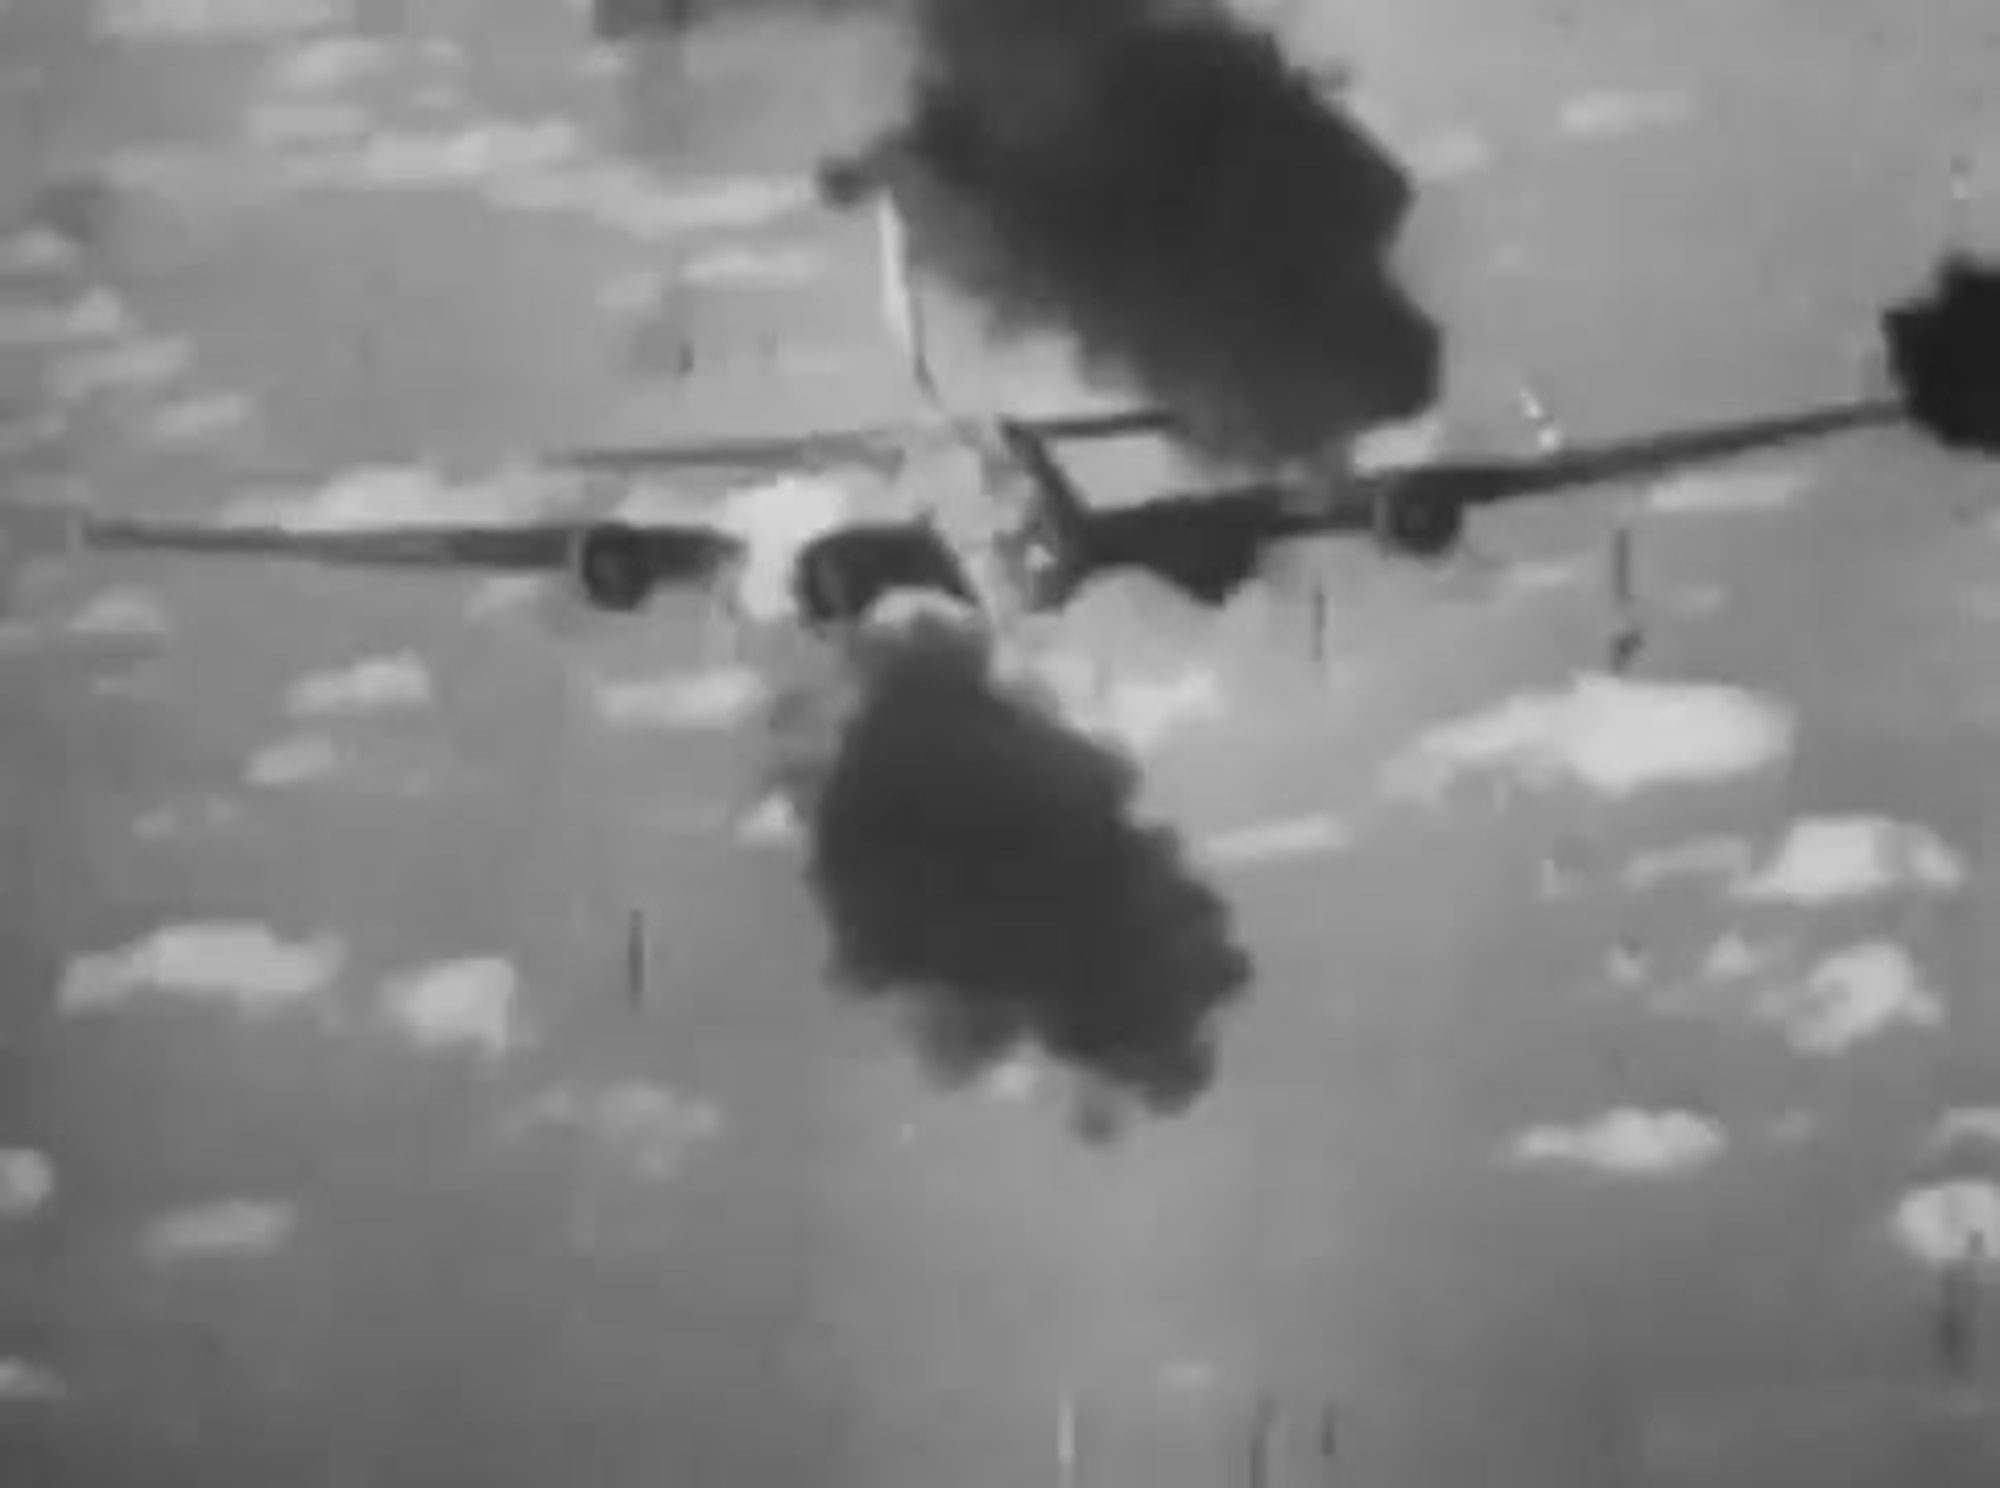 Photo taken by a German fighter during a head-on attack on an American B-17 Flying Fortress, possibly in 1943. The black smoke comes from hits made by the German fighter on the B-17. (Archive photo)